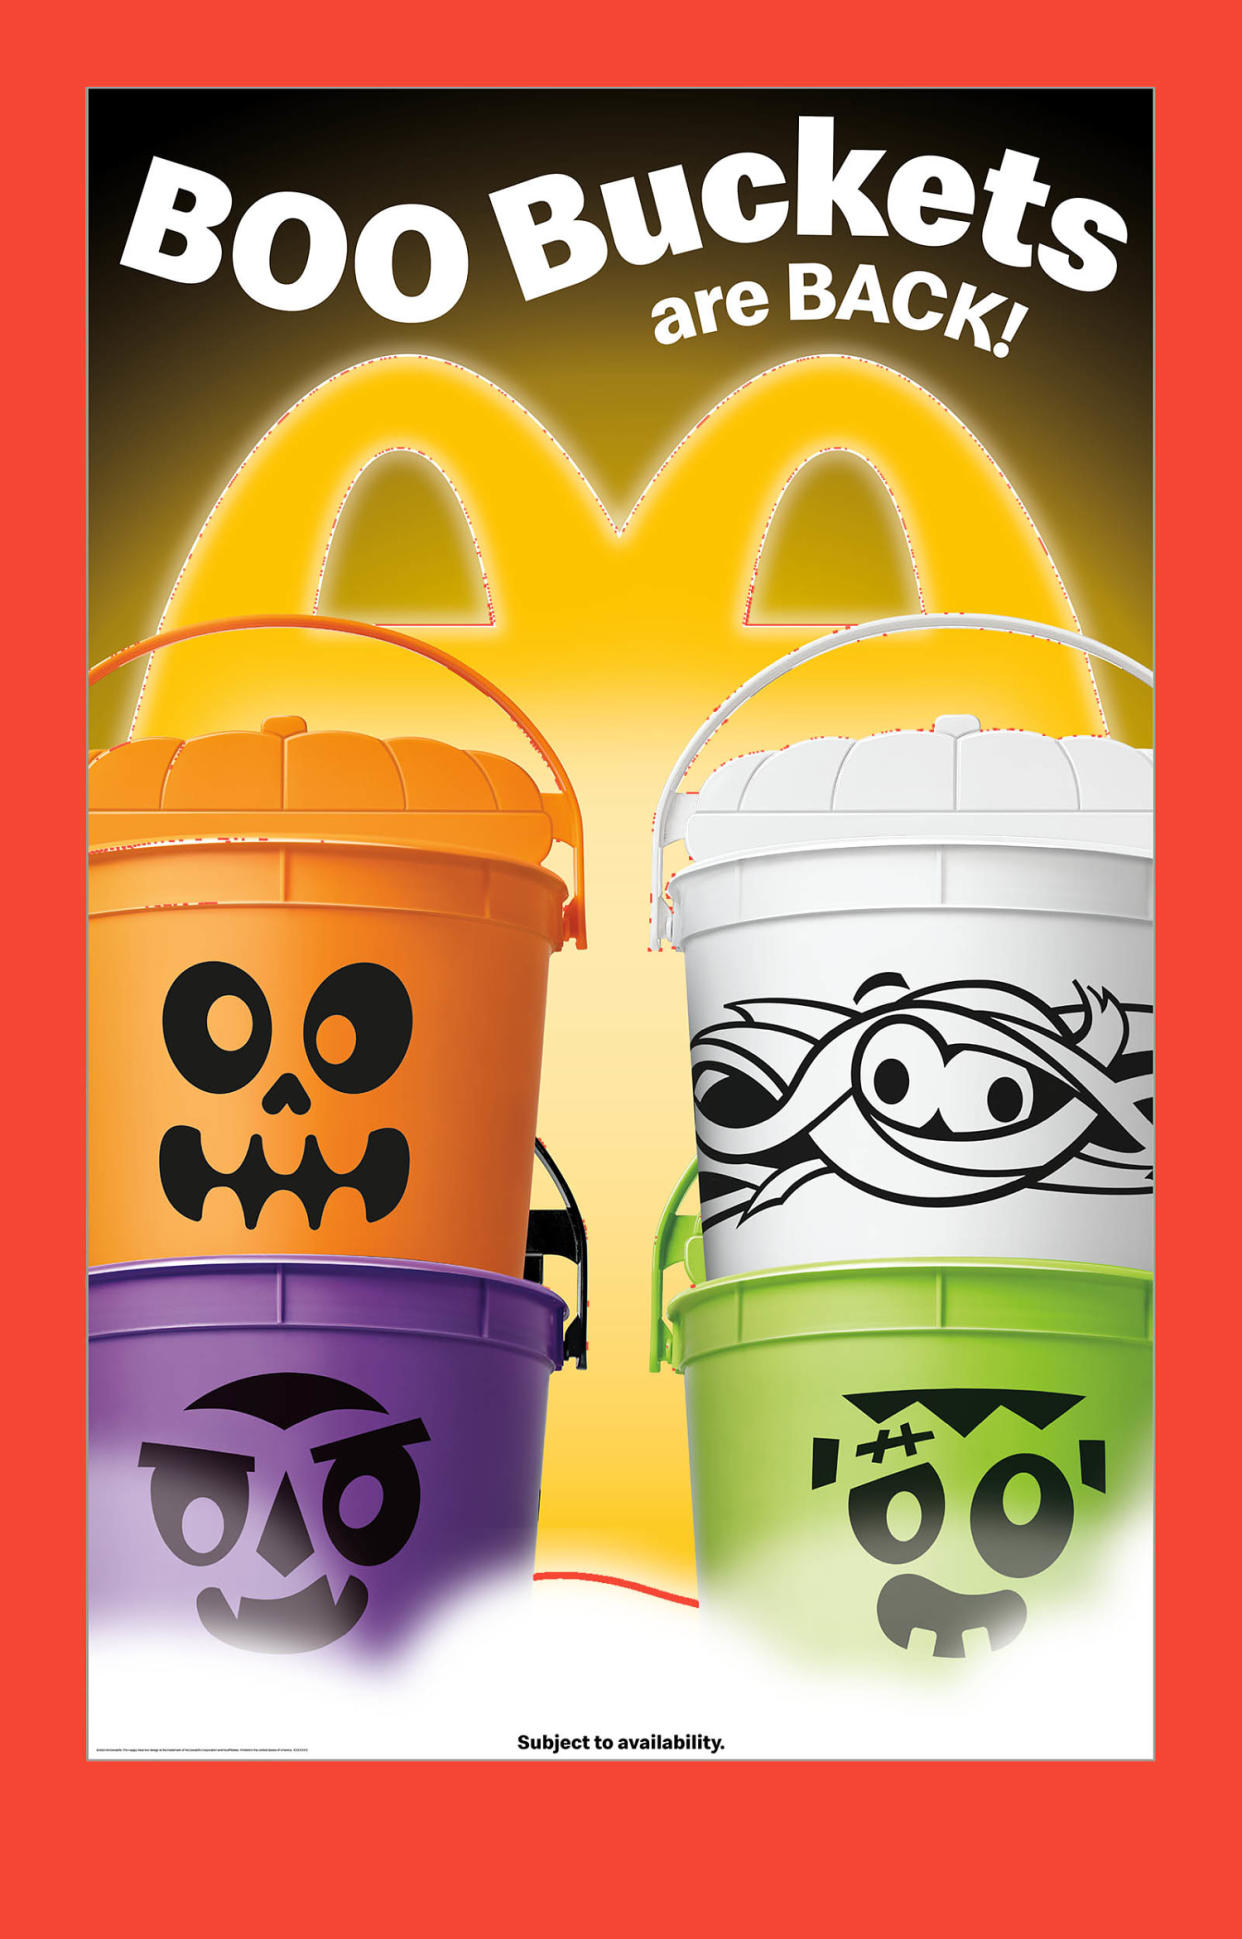 McDonald’s Boo Buckets are back this Halloween with a new color